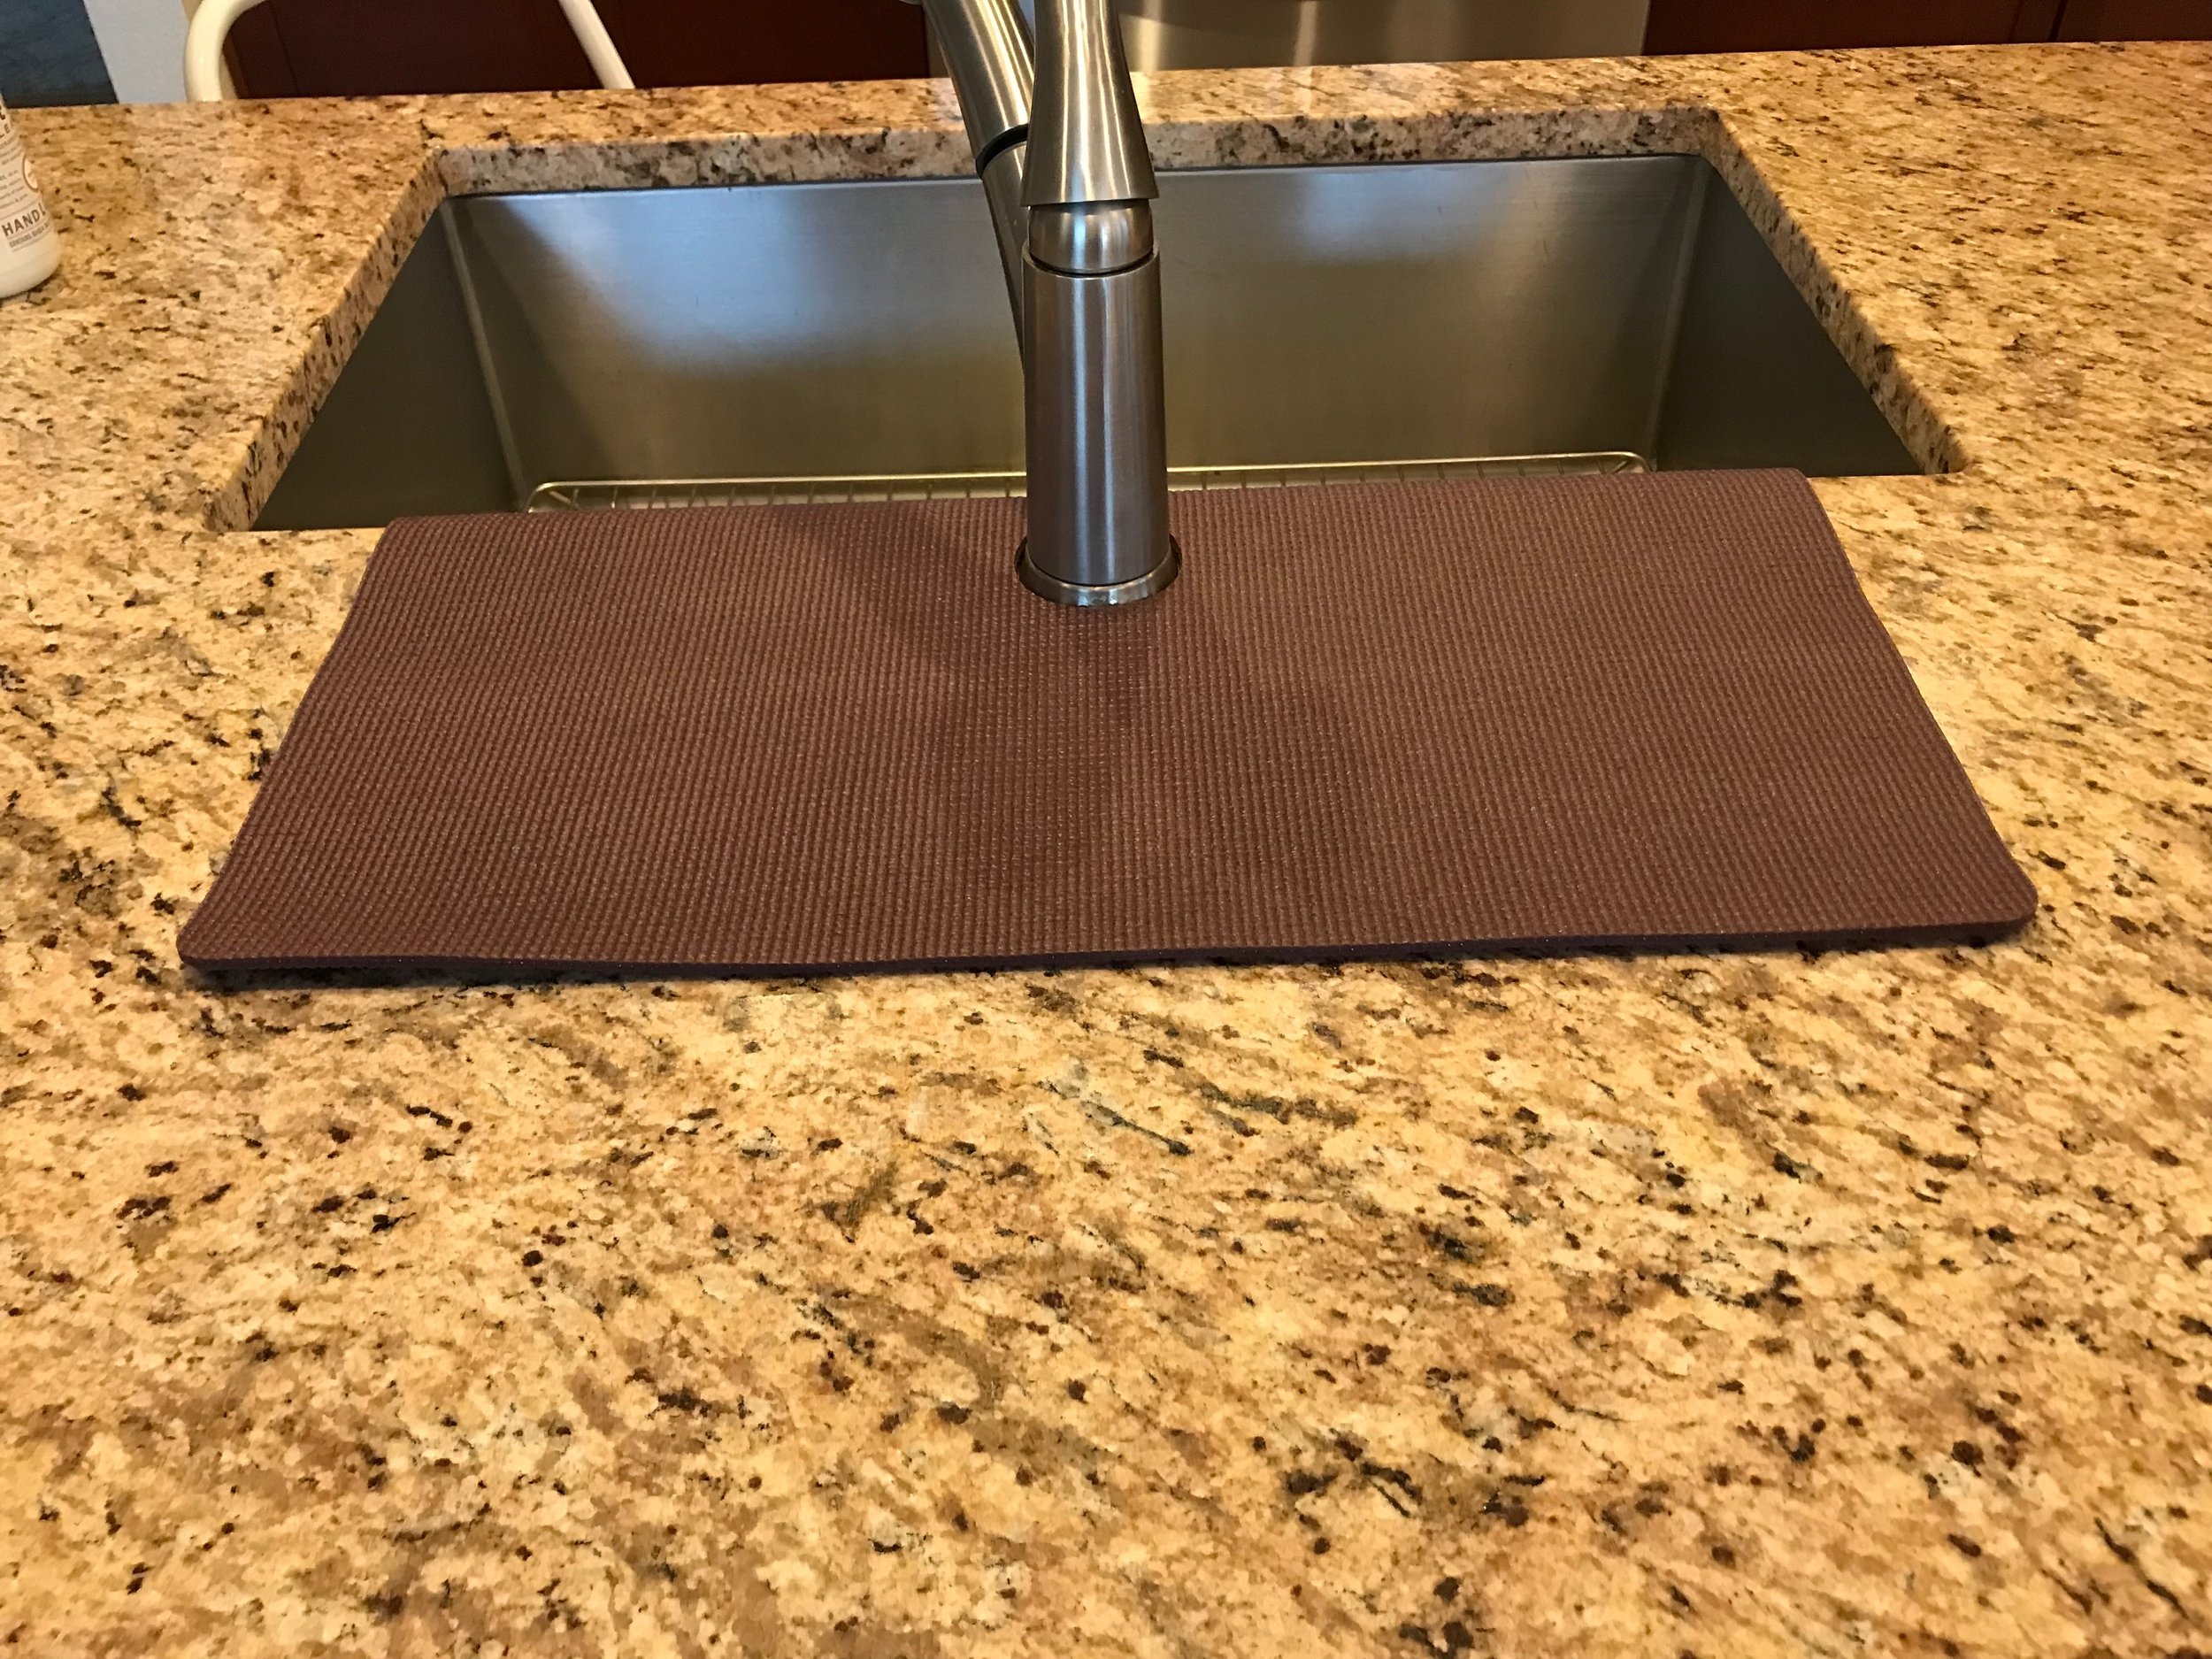 Chocolate Brown Kitchen Sink Faucet Splash Guard Protects From